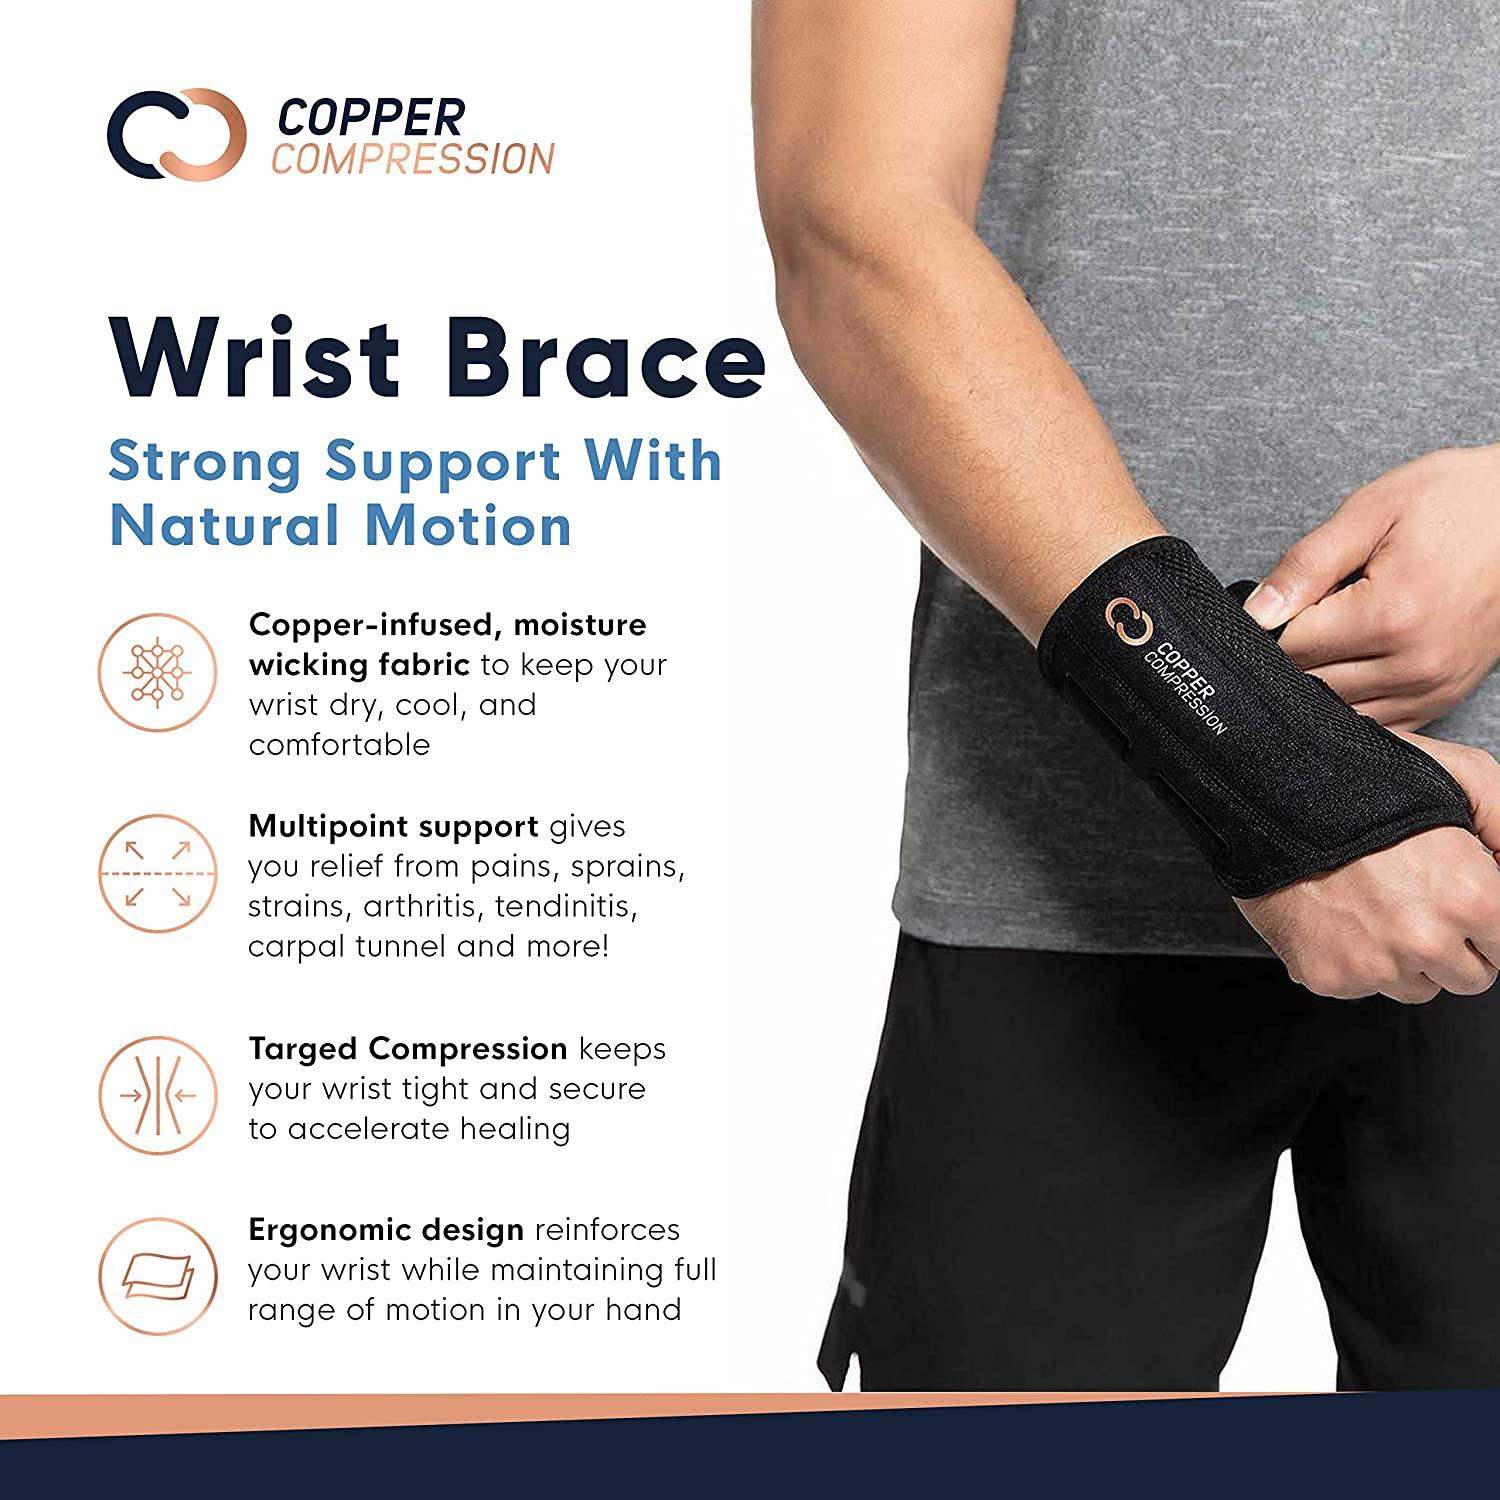 copper wrist brace  Copper Compression Recovery Wrist Brace - Copper  Infused Adjustable Support Splint for Pain, Carpal Tunnel, Arthritis,  Tendonitis, RSI, Sprain. Night Day Splint for Men Women - Fits Left Hand S-M